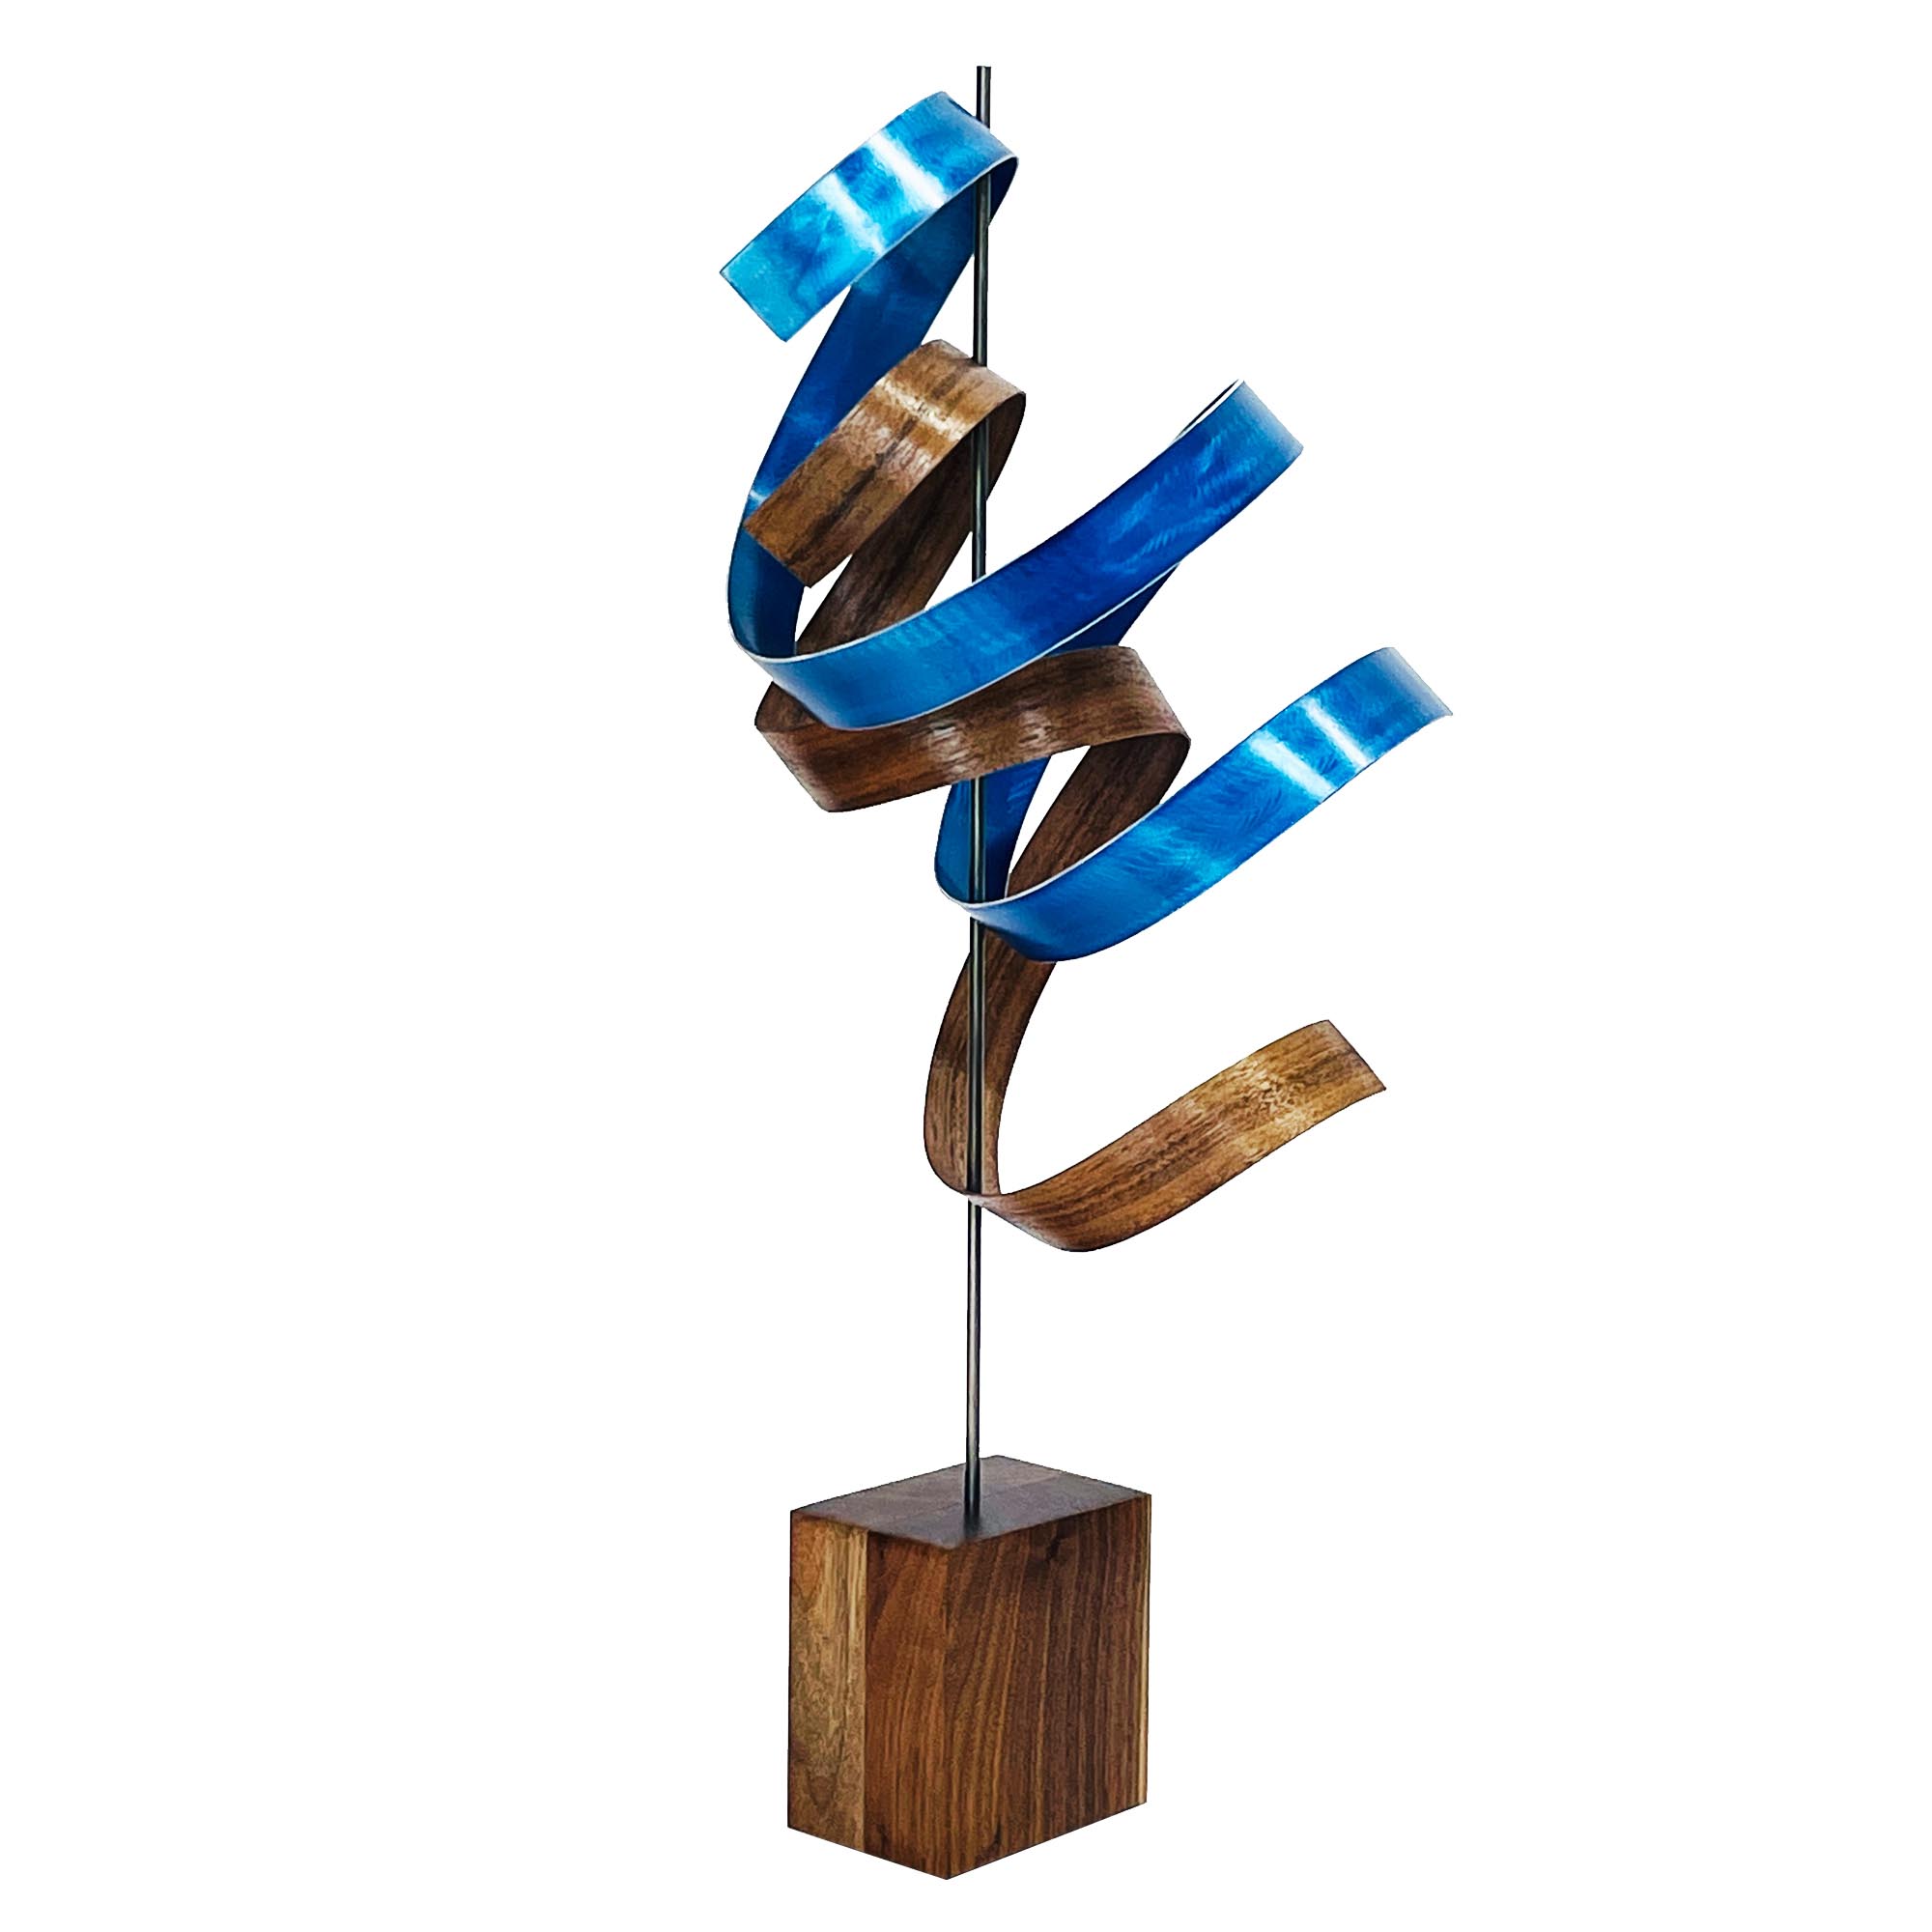 Ribbon Walnut by Jackson Wright - Abstract Wood Sculpture, Kinetic Sculpture - Image 3